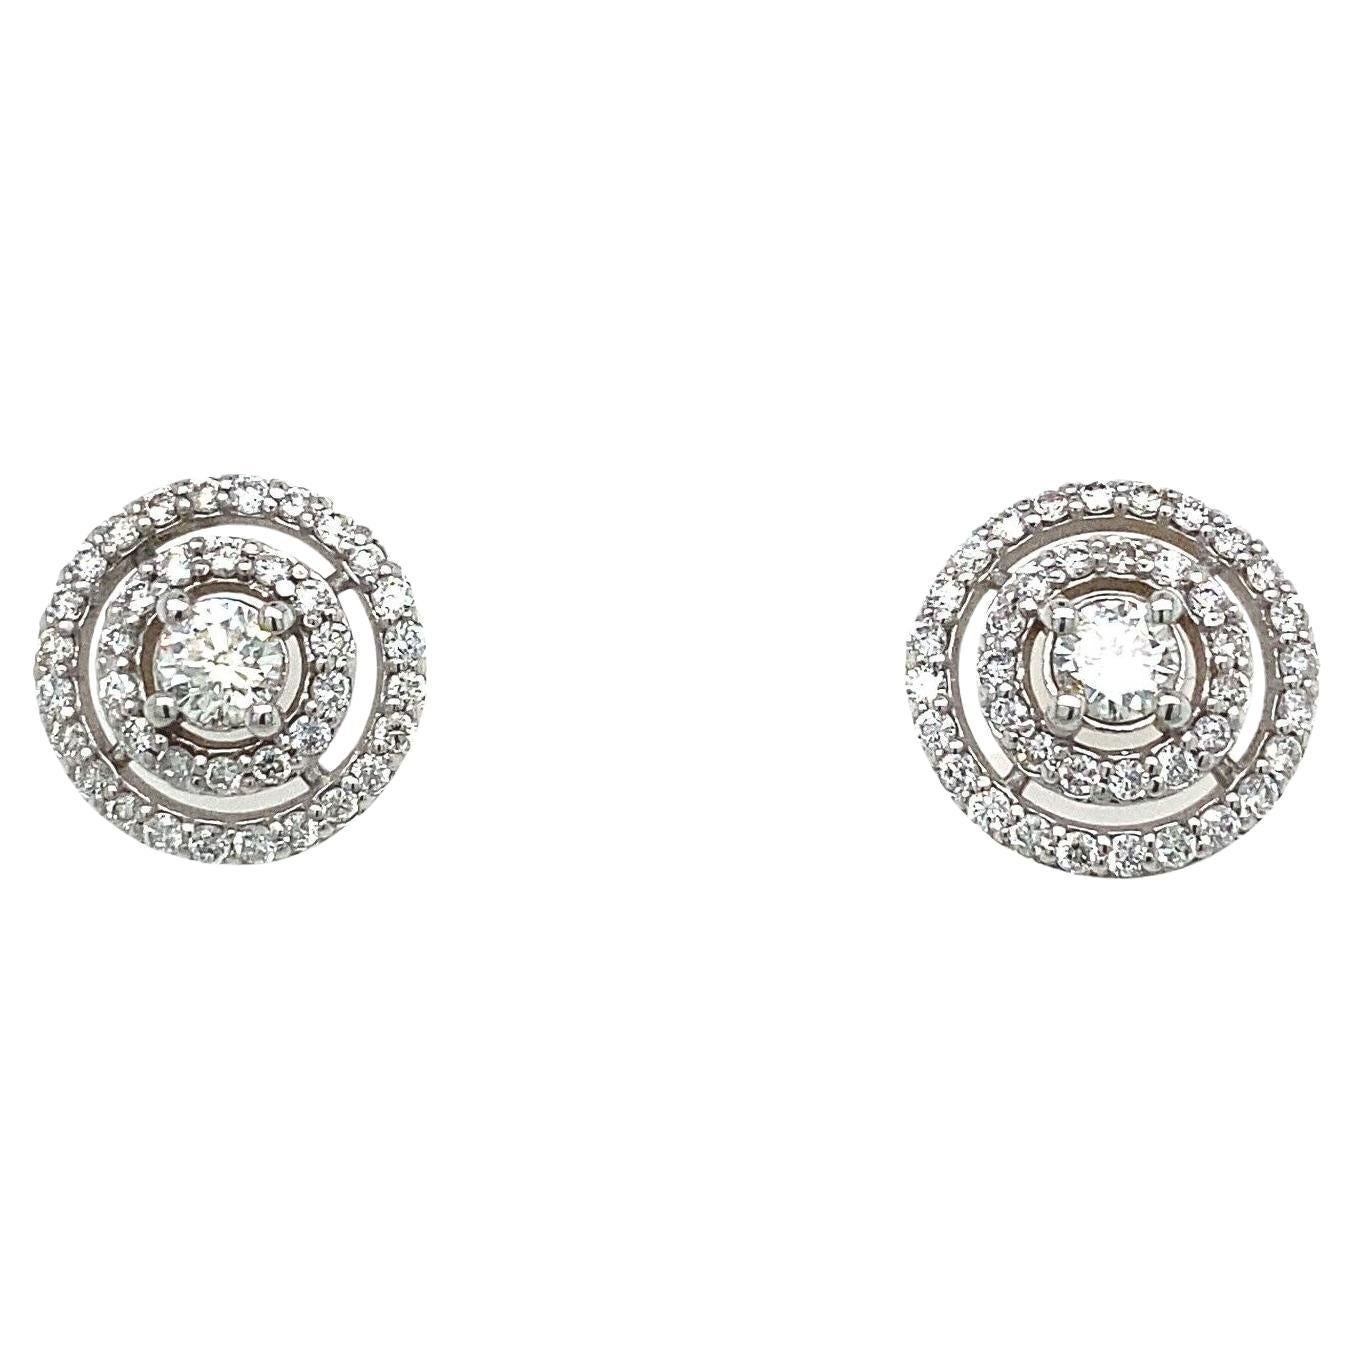 18ct White Gold 2 Row Pave Set Diamond Earrings Set With 0.75ct Of Round Diamond

These elegant 18ct White Gold earrings feature 0.75ct of round Diamonds. The earrings are set in a 2 row pave set Diamond halo setting, are the perfect choice for a